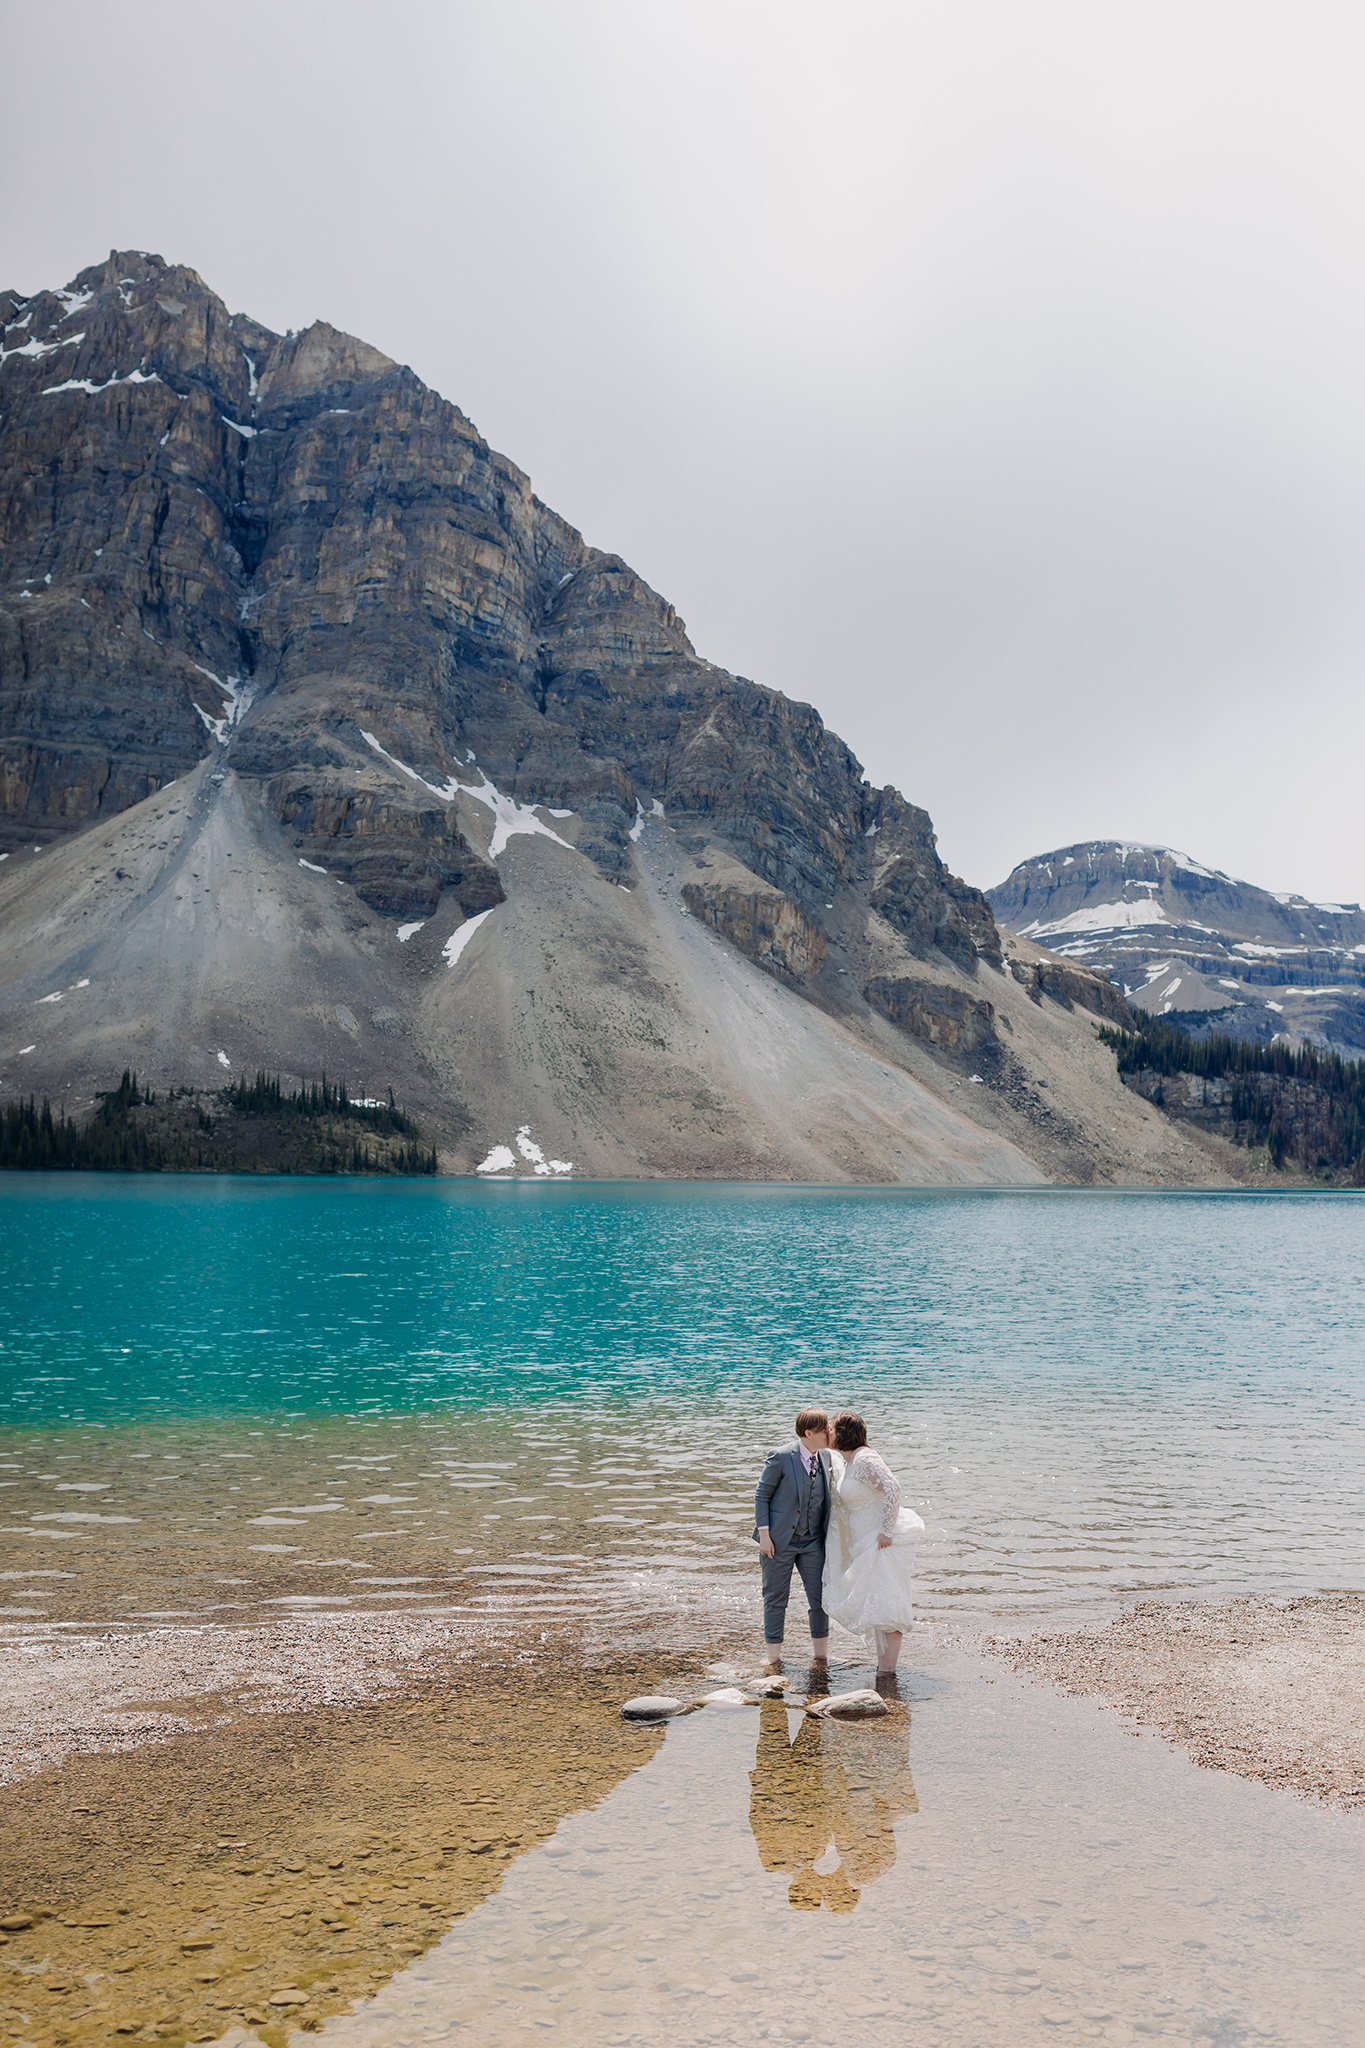 Post-wedding portraits wading in Bow Lake. same-sex wedding. Mountain Wedding portraits photographed by ENV Photography. Gay friendly. LGBTQ friendly wedding & elopement photographer.g portraits on the shores of Bow Lake. same-sex wedding. Mountain Wedding portraits photographed by ENV Photography. Gay friendly. LGBTQ friendly wedding & elopement photographer.